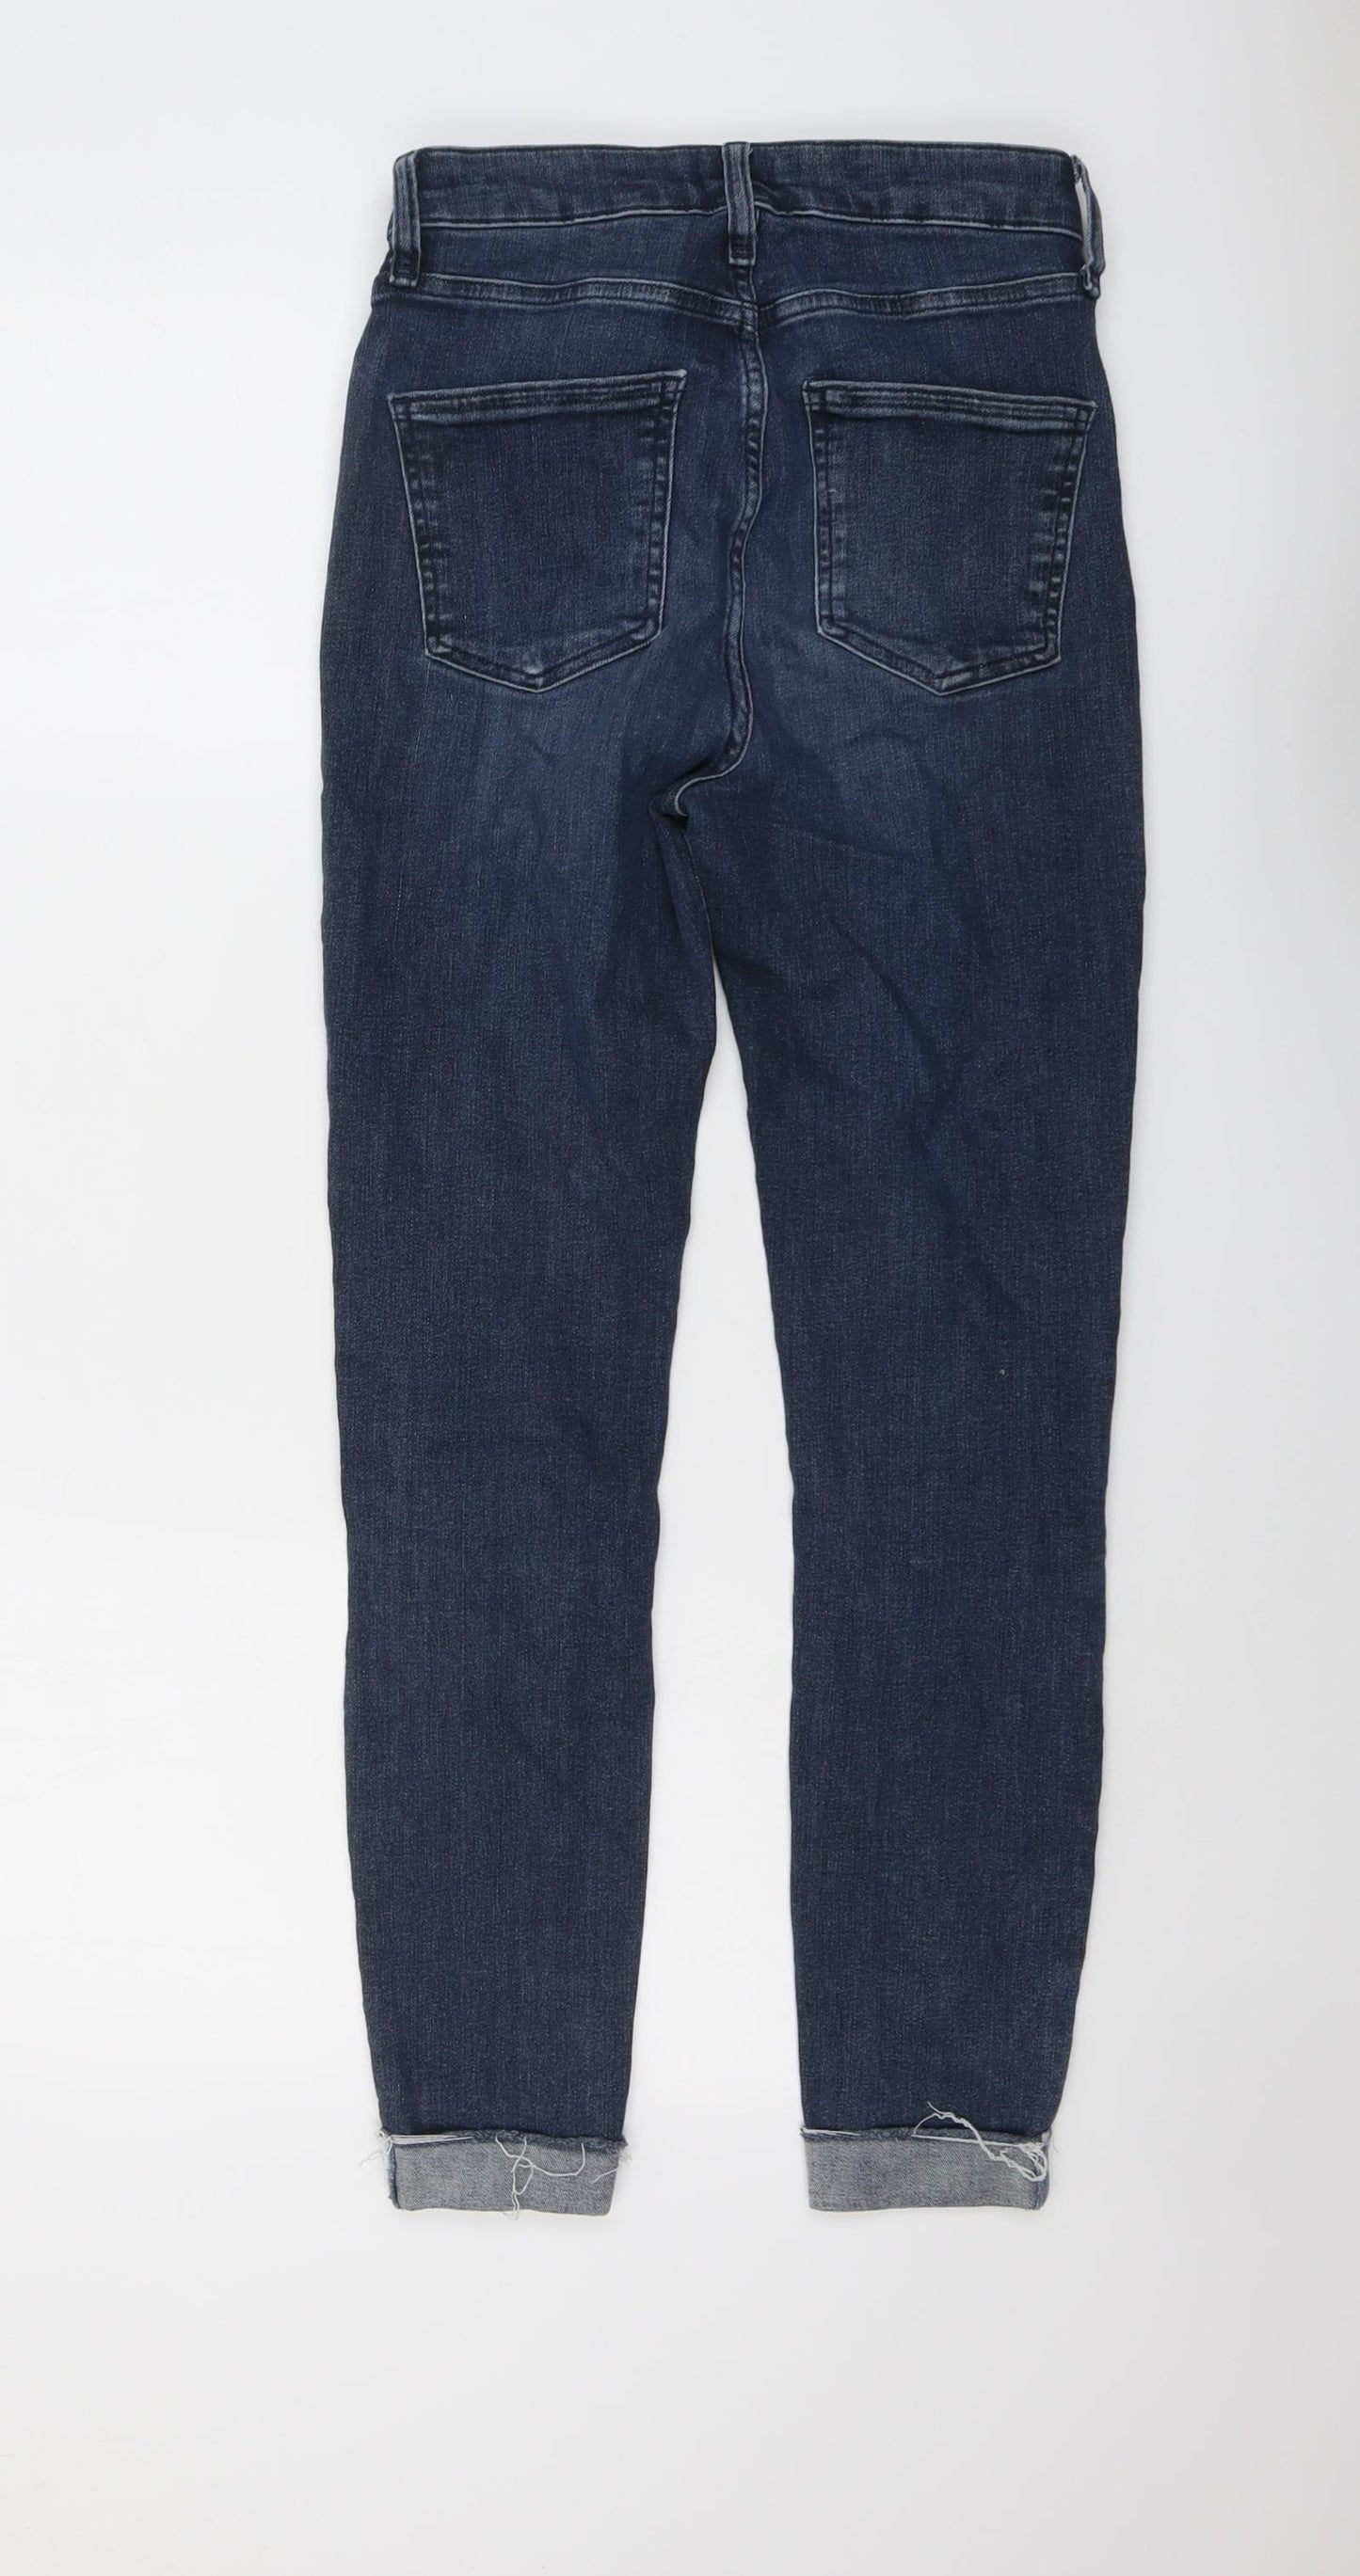 River Island Womens Blue Cotton Skinny Jeans Size 10 L27 in Regular Button - Distressed Hems